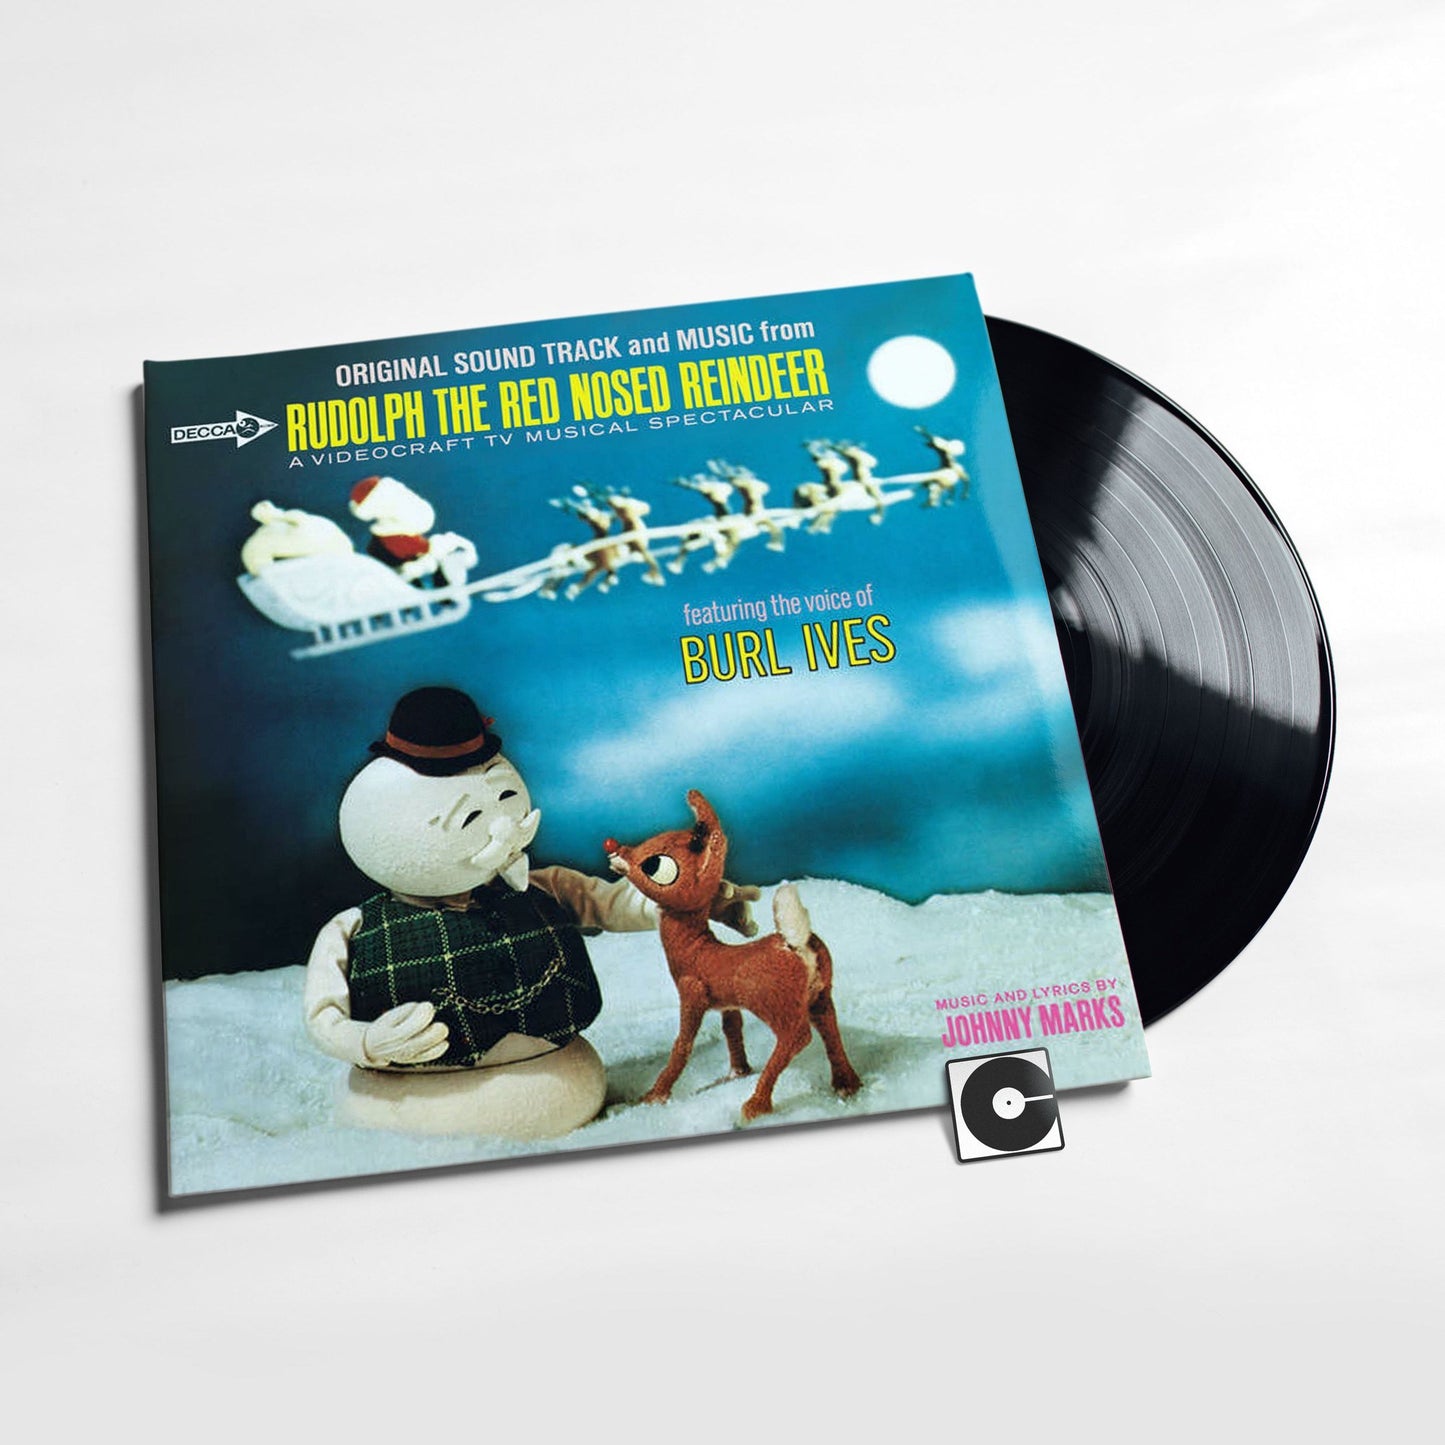 Burl Ives - "Rudolph The Red-Nosed Reindeer"